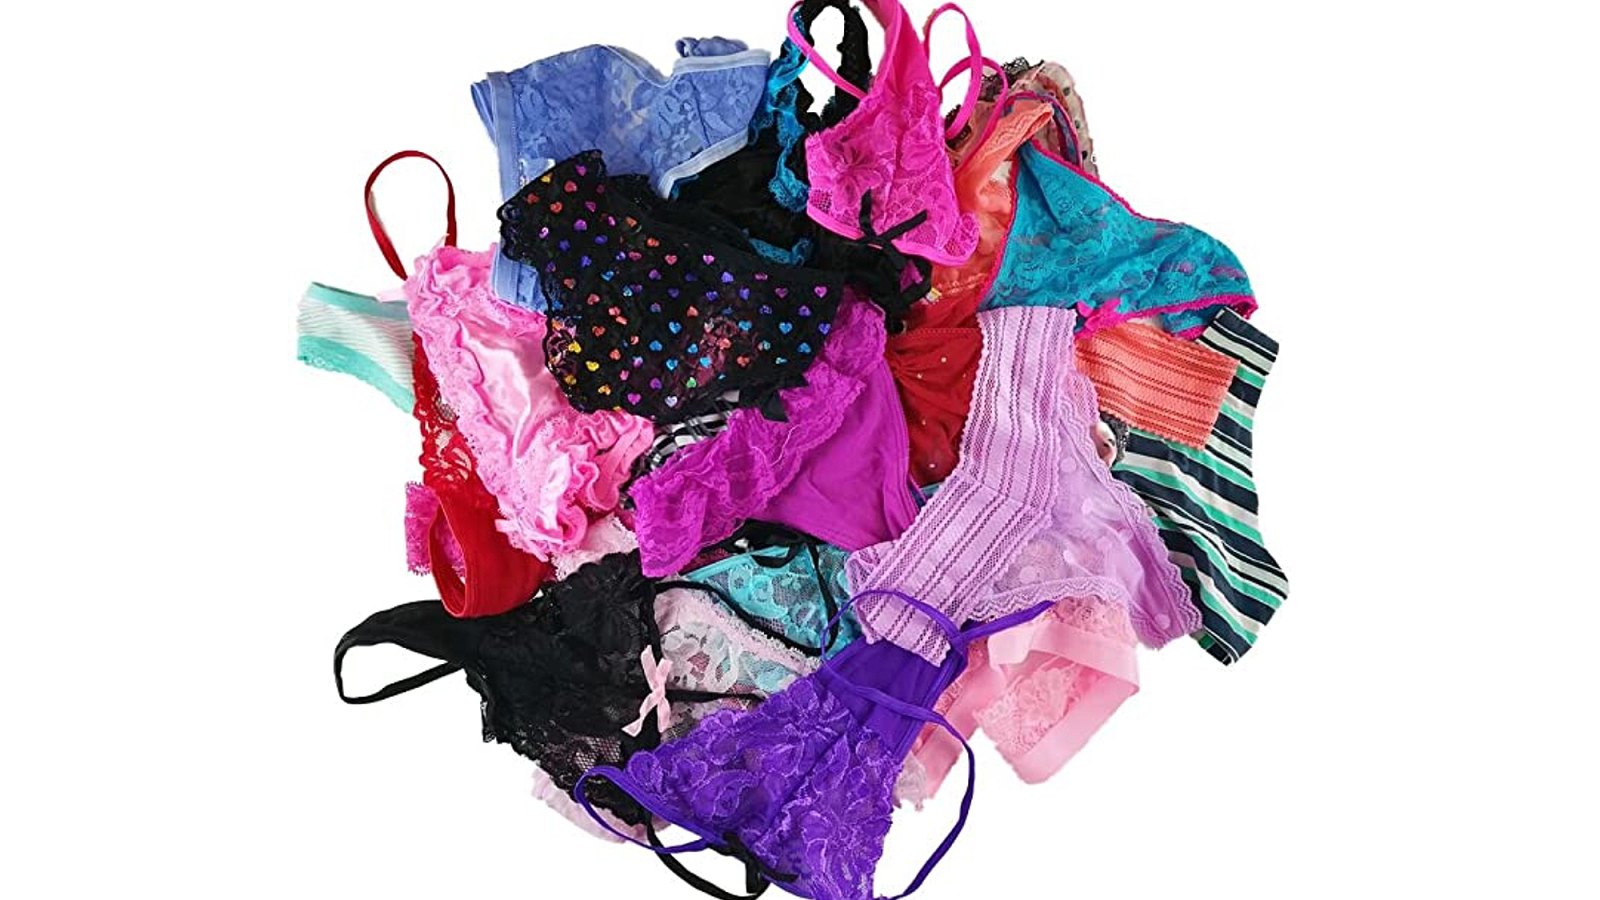 12 Pieces/Lot) Variety Of Women Underwear Pack T-Back Thong G